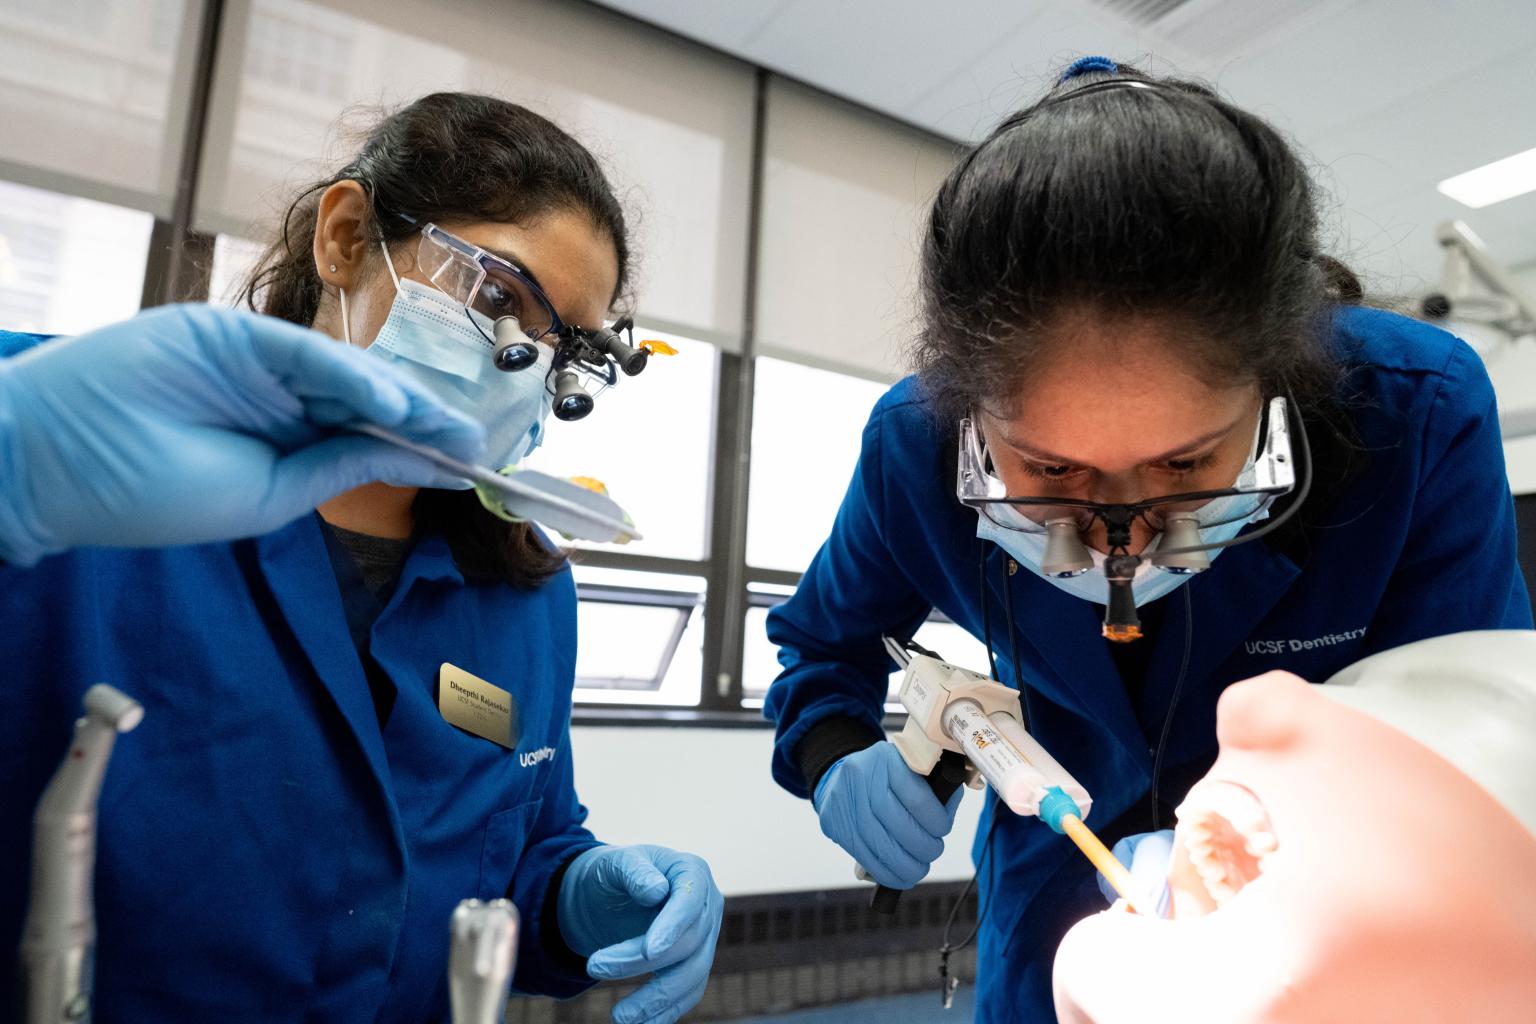 Students learning at UCSF School of Dentistry 